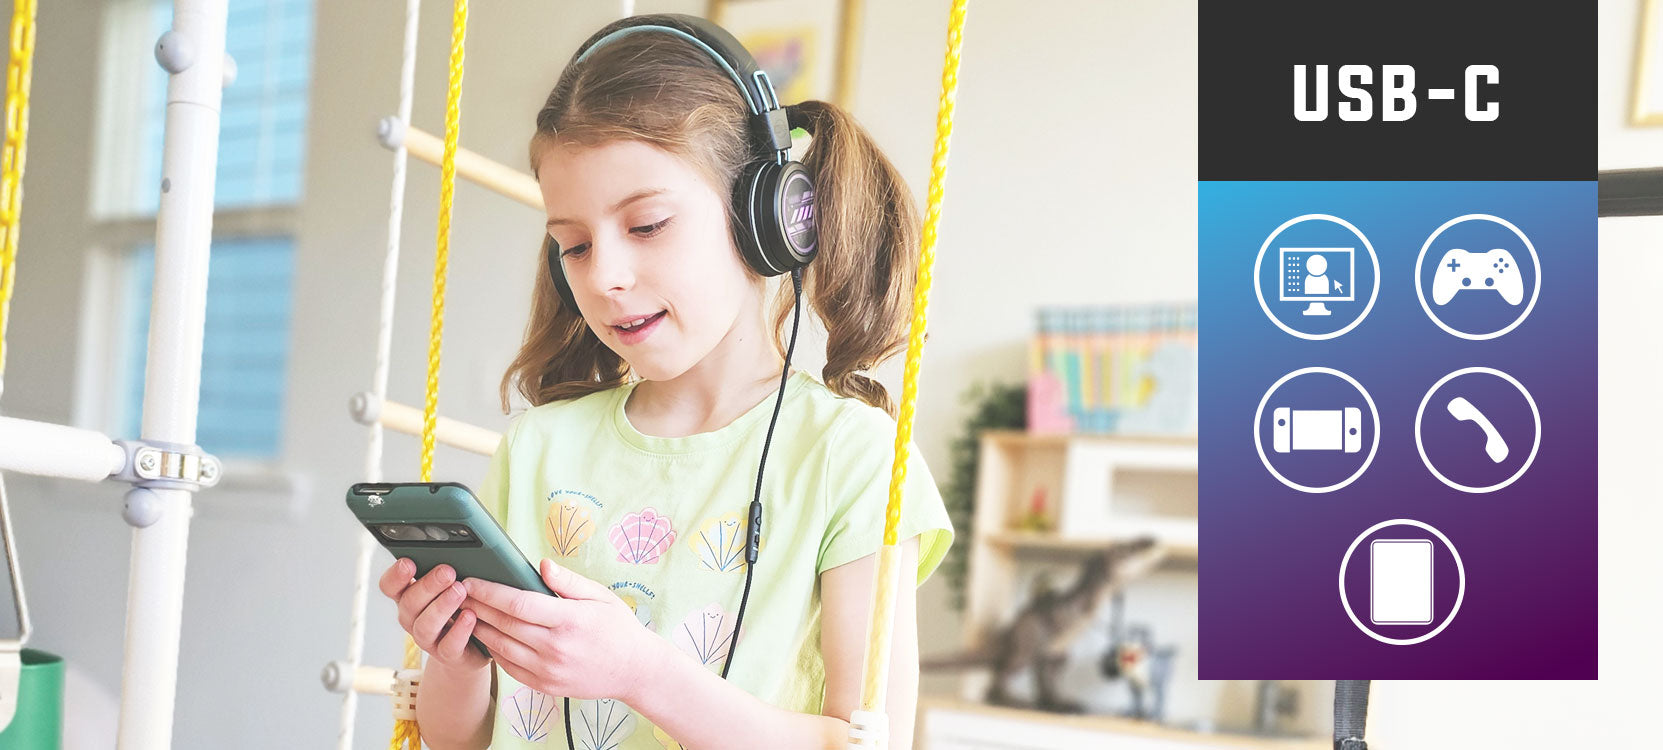 A young girl wearing headphones uses a smartphone, with graphics showing usb-c compatibility symbols for various devices on the right side.